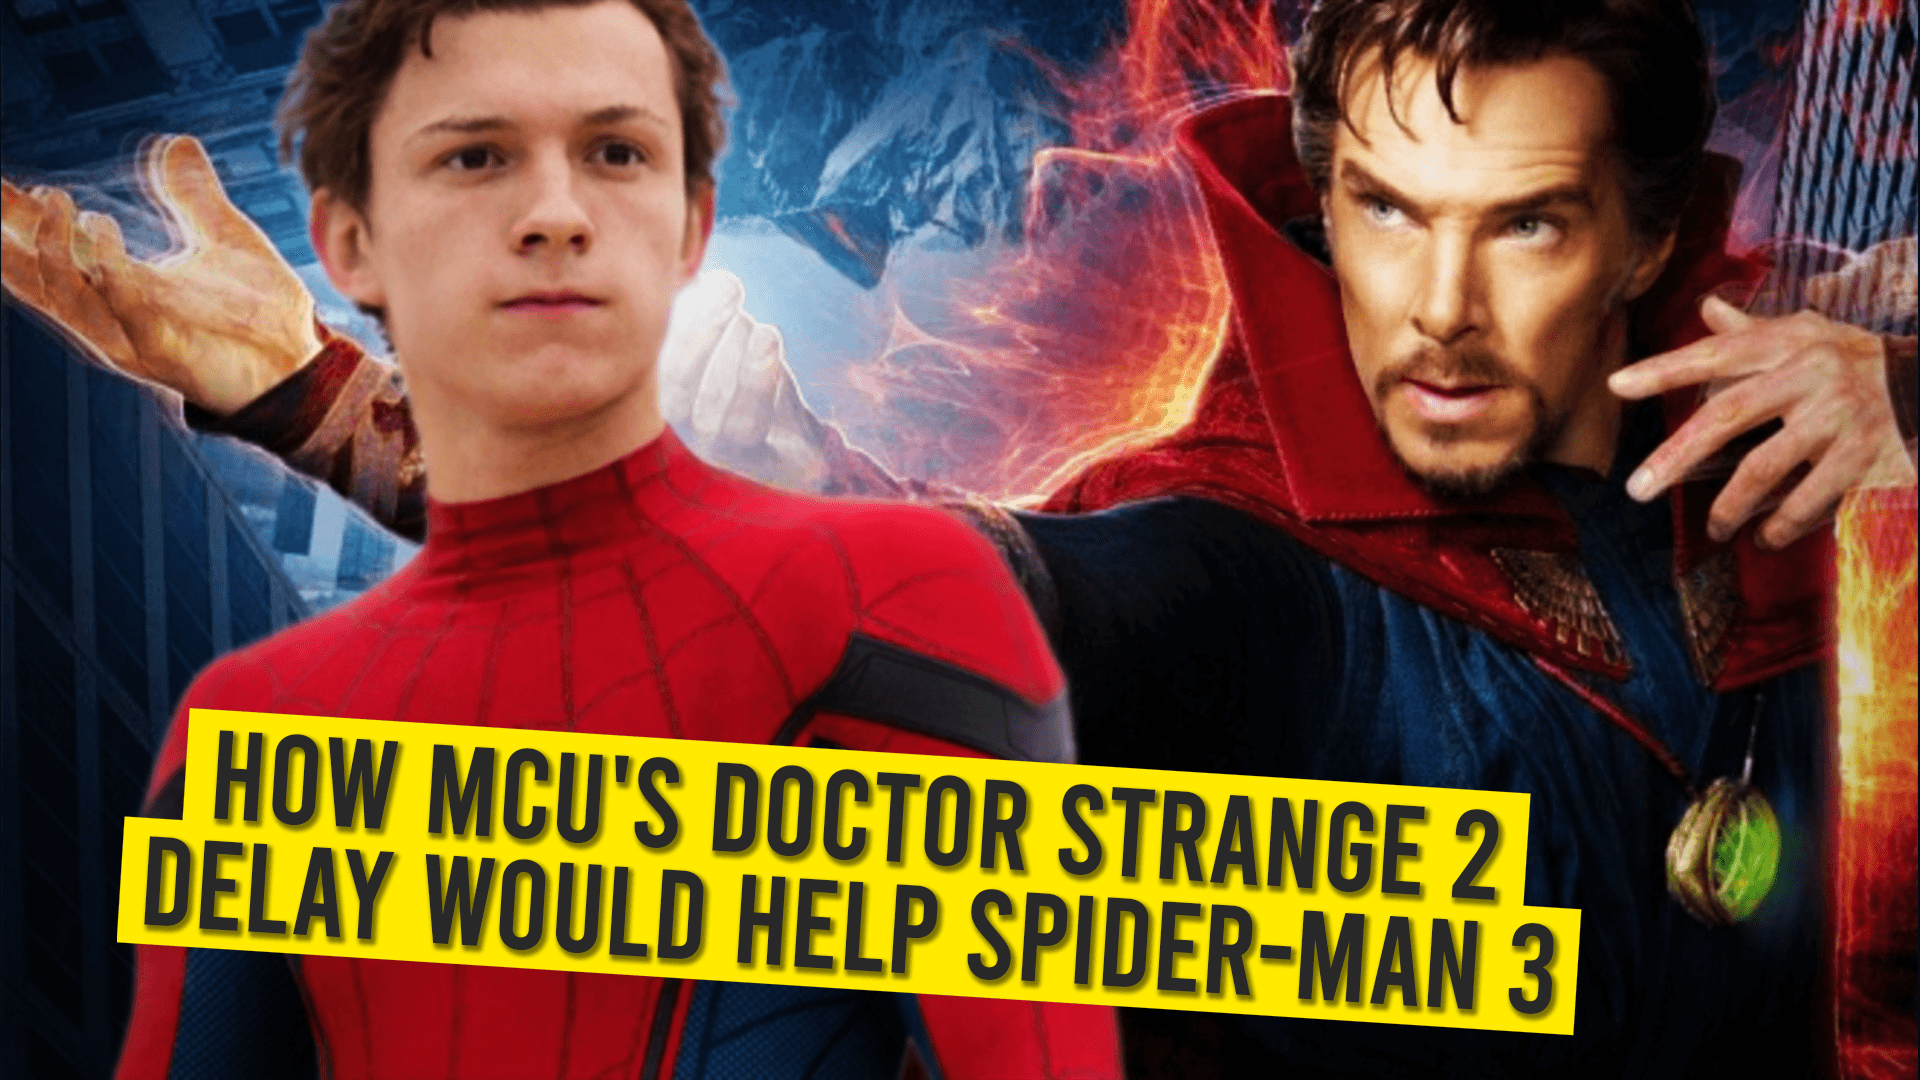 How MCU’s Doctor Strange 2 Delay Would Help Spider-Man 3